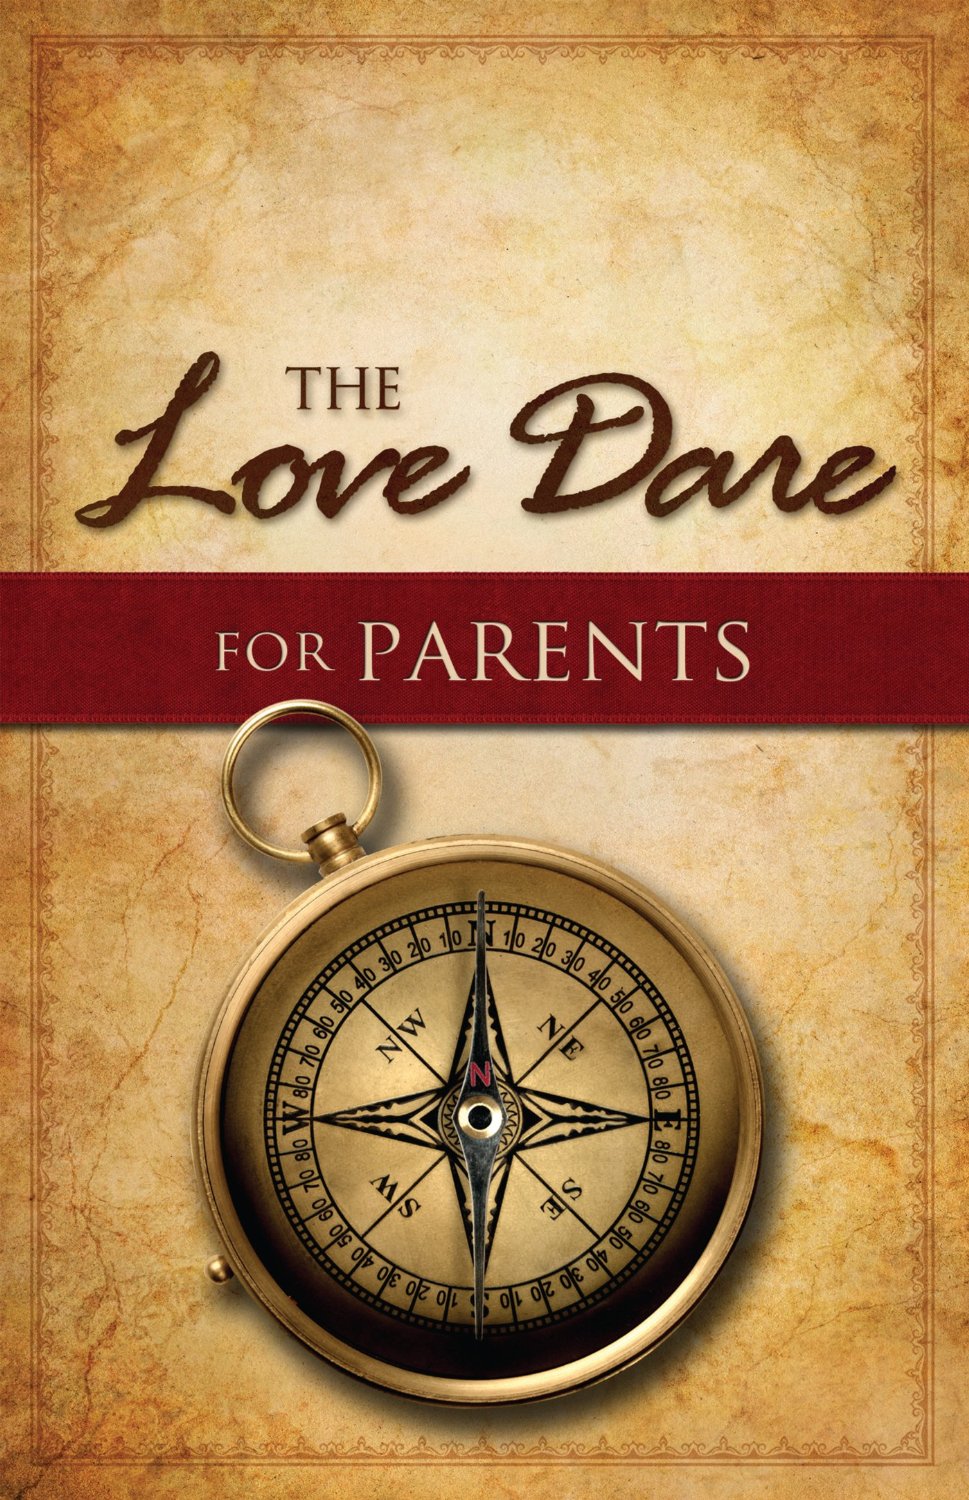 Book Review: The Love Dare for Parents